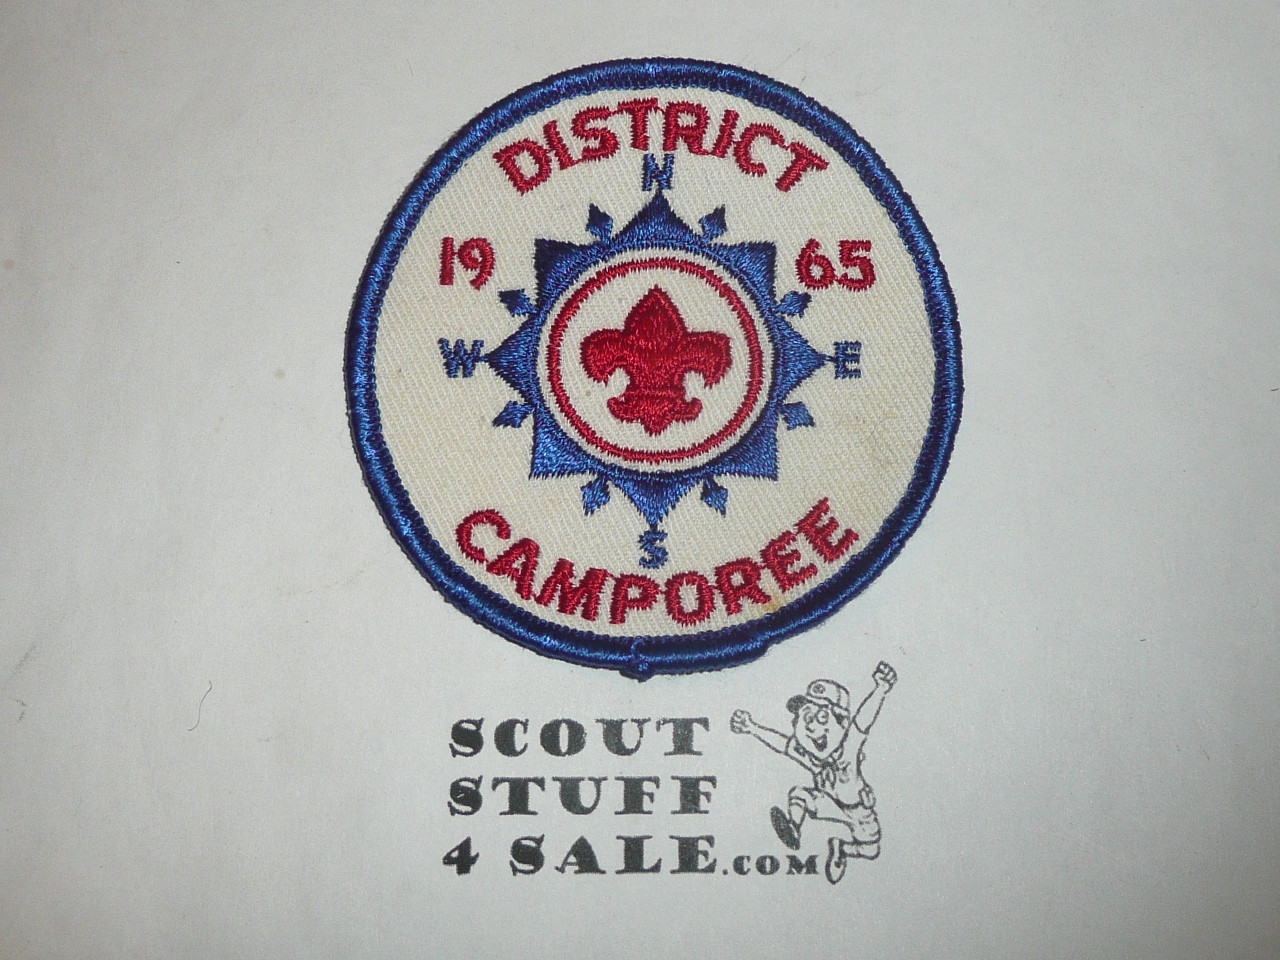 1965 District Camporee Patch, Generic BSA issue, compass